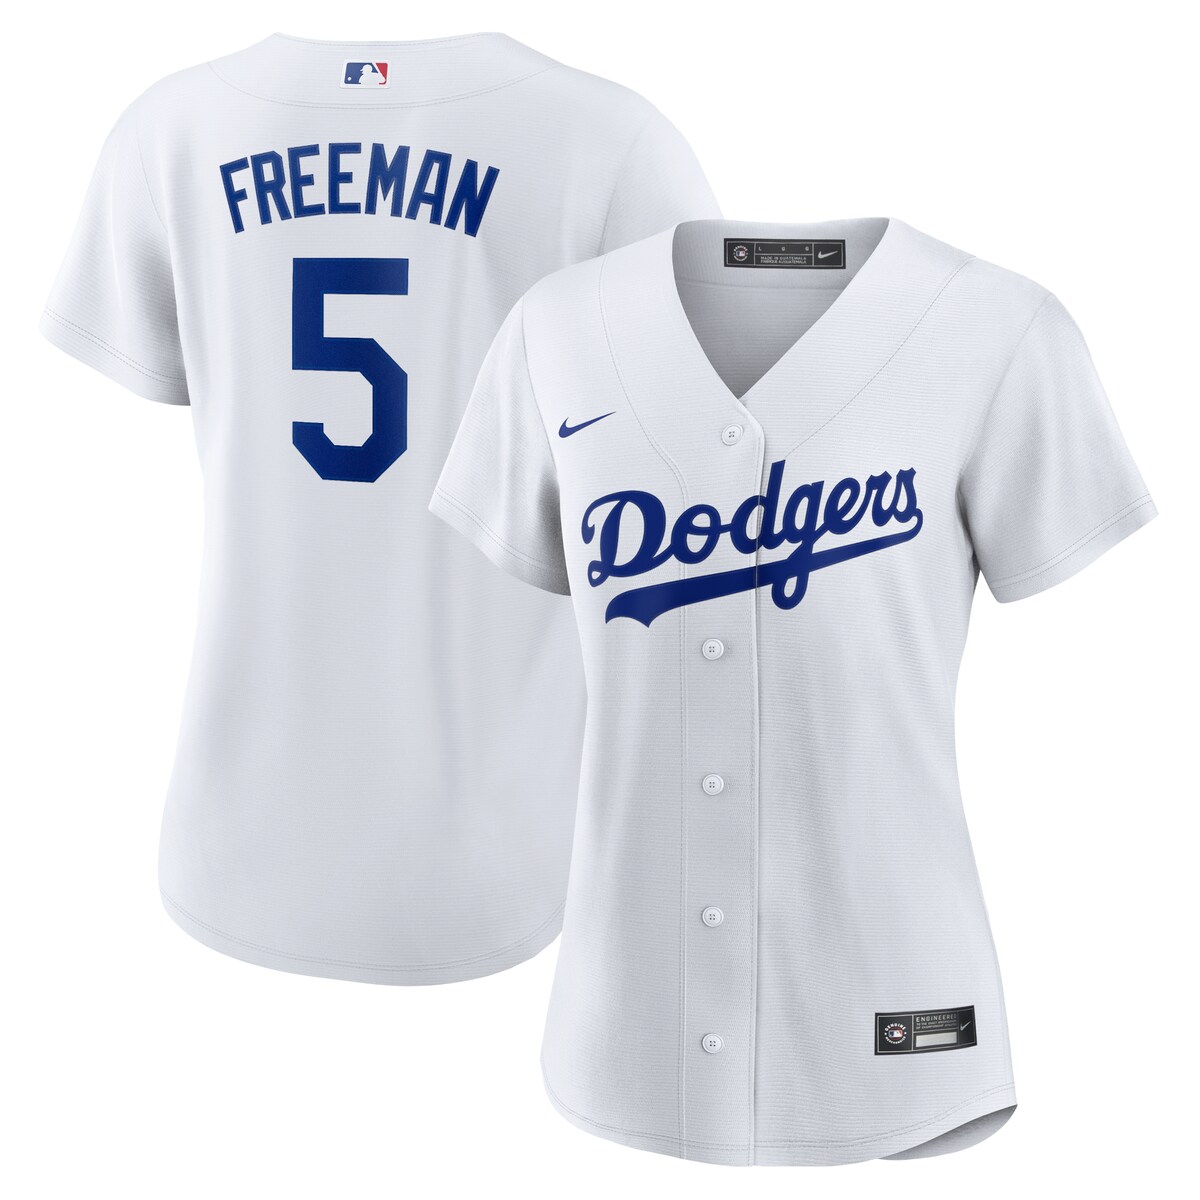 Your Los Angeles Dodgers dominate on the diamond, and now you can match the team from anywhere with this Freddie Freeman Replica Player Jersey. This Nike jersey features classic details, like a rounded droptail hem and full-button front. The spirited Los Angeles Dodgers graphics will ensure fellow fans know where your allegiance lies.Short sleeveReplica JerseyOfficially licensedTackle twill graphicsHeat-sealed jock tag at hemMachine wash gentle or dry clean. Tumble dry low, hang dry preferred.Rounded droptail hemImportedMaterial: 100% PolyesterBrand: NikeFull-button front